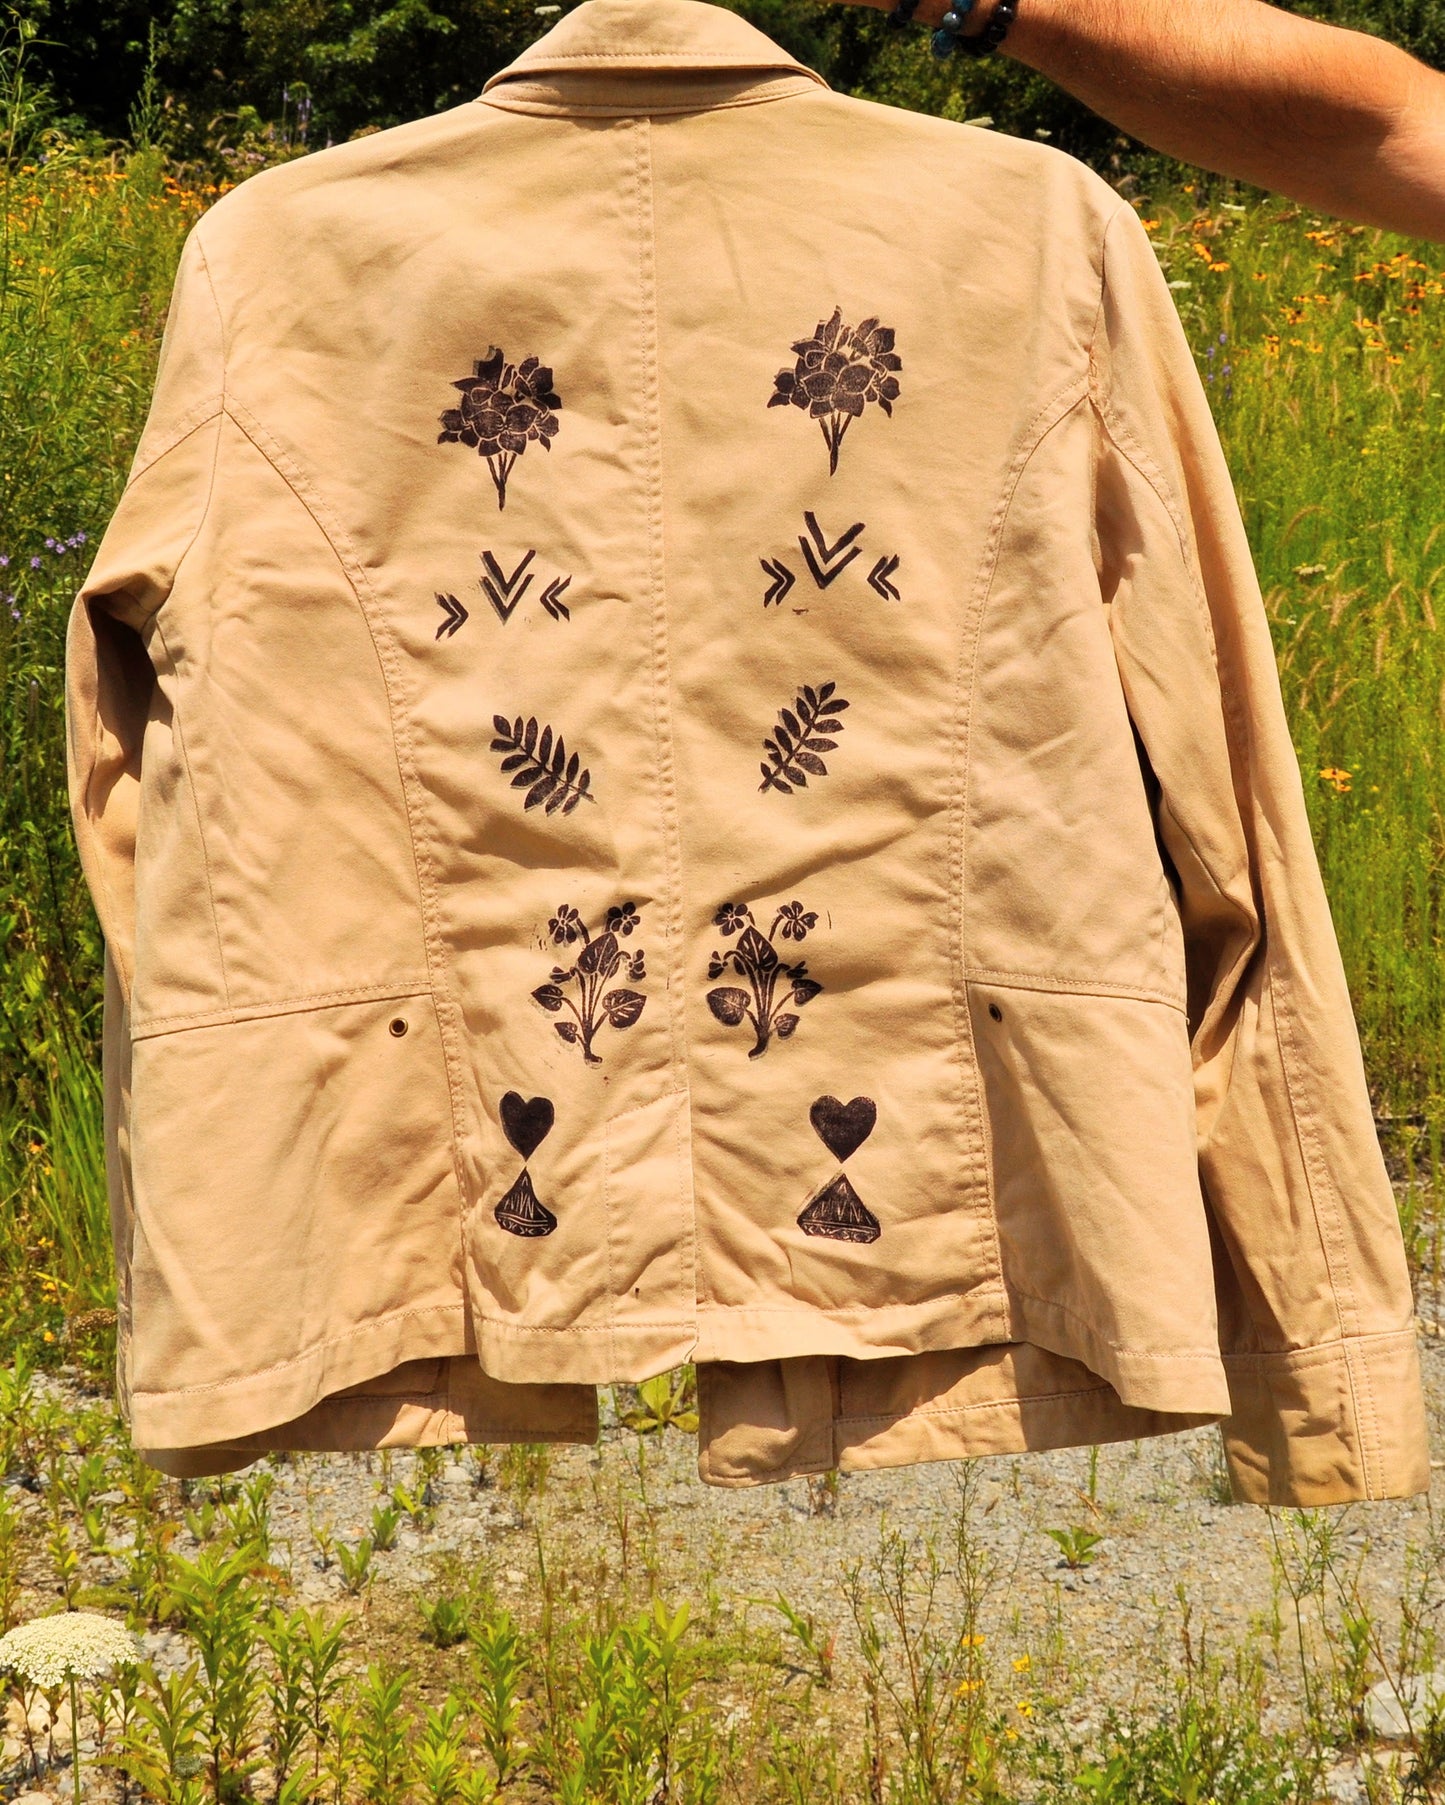 The Rider, Military-Style Cotton Jacket